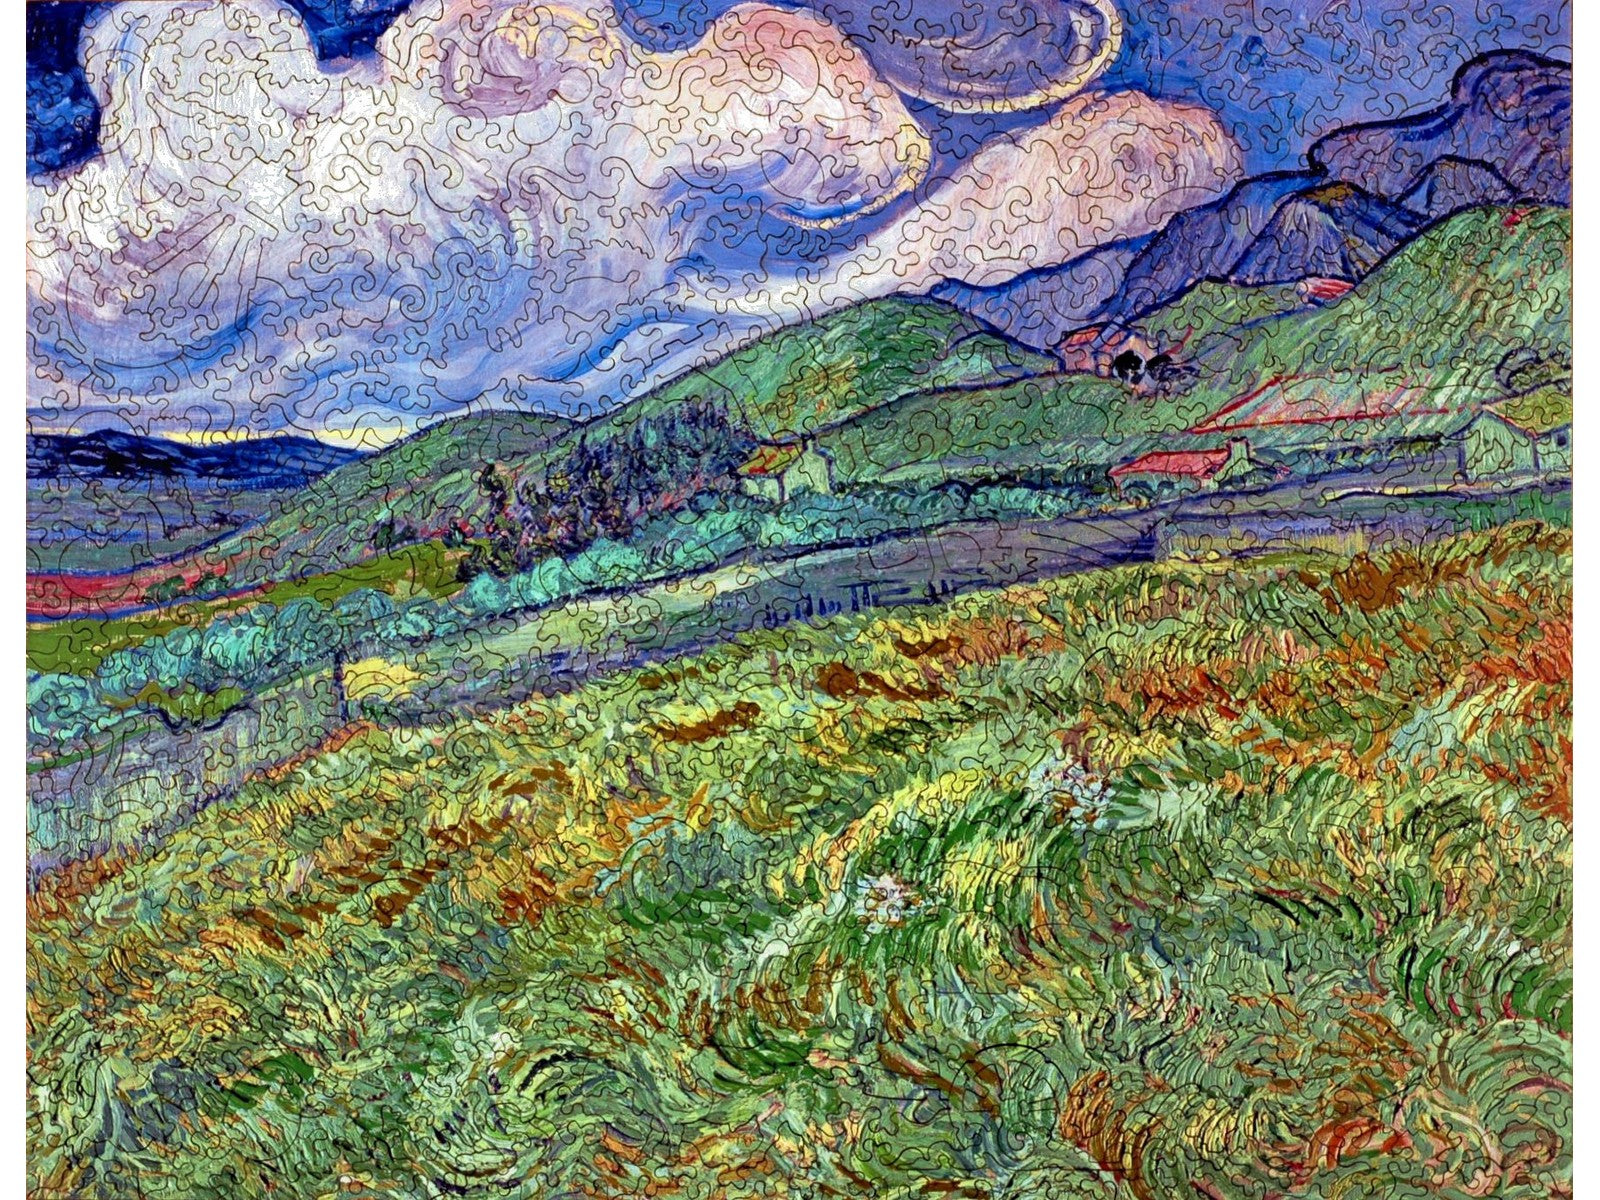 The front of the puzzle, Mountainous Landscape Behind Saint-Remy, showing a green field with blue mountains and a sky filled with clouds.